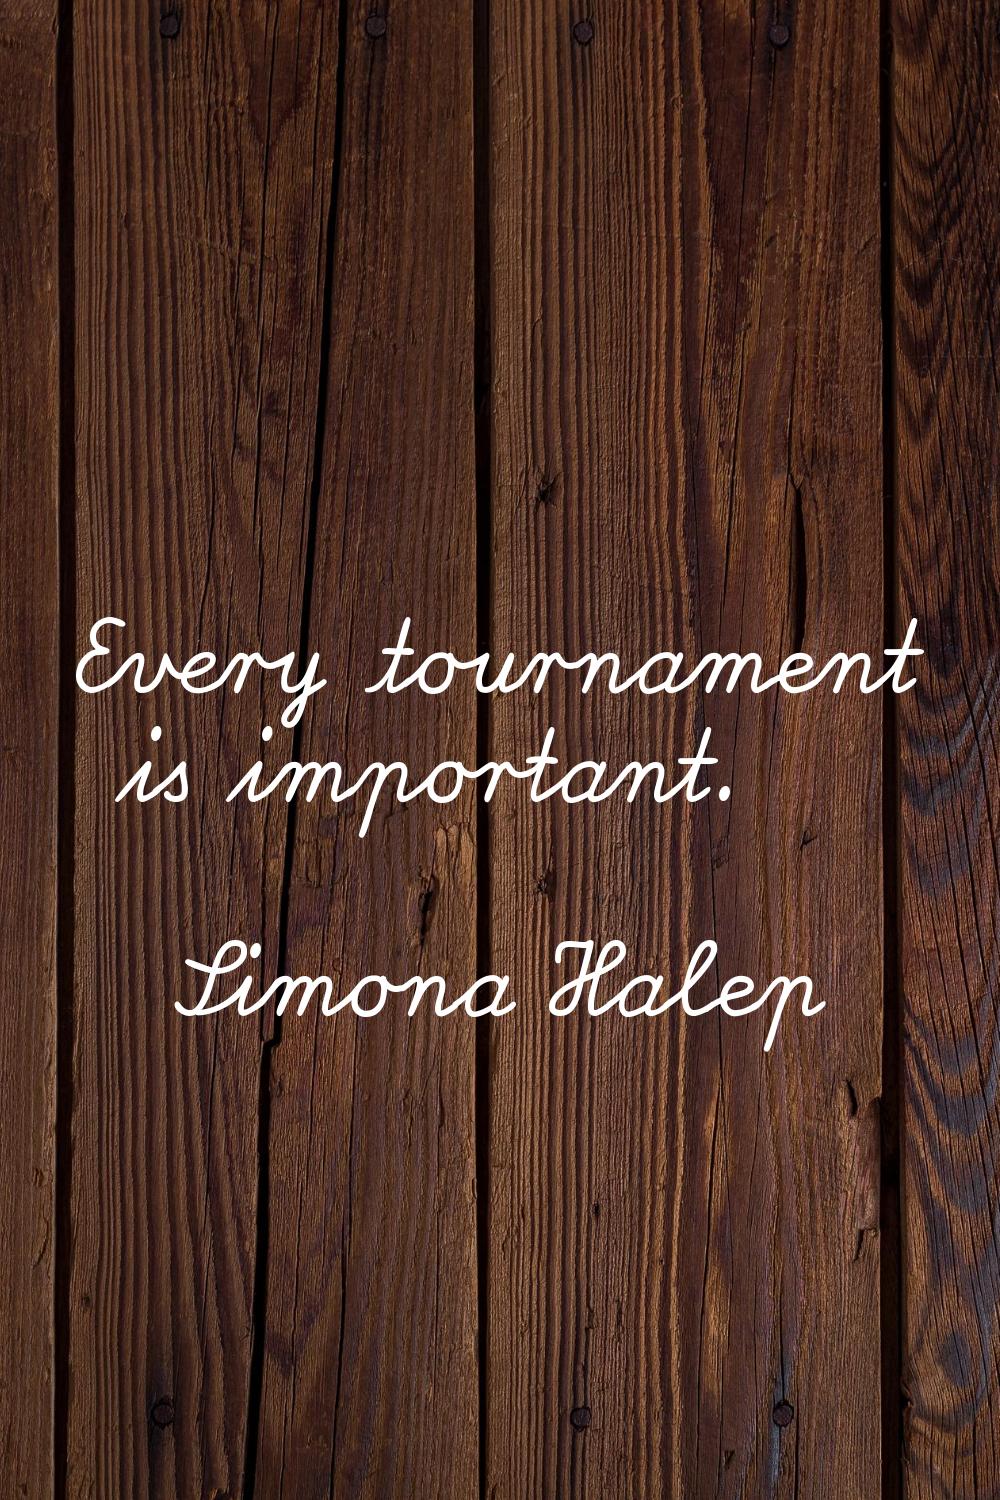 Every tournament is important.